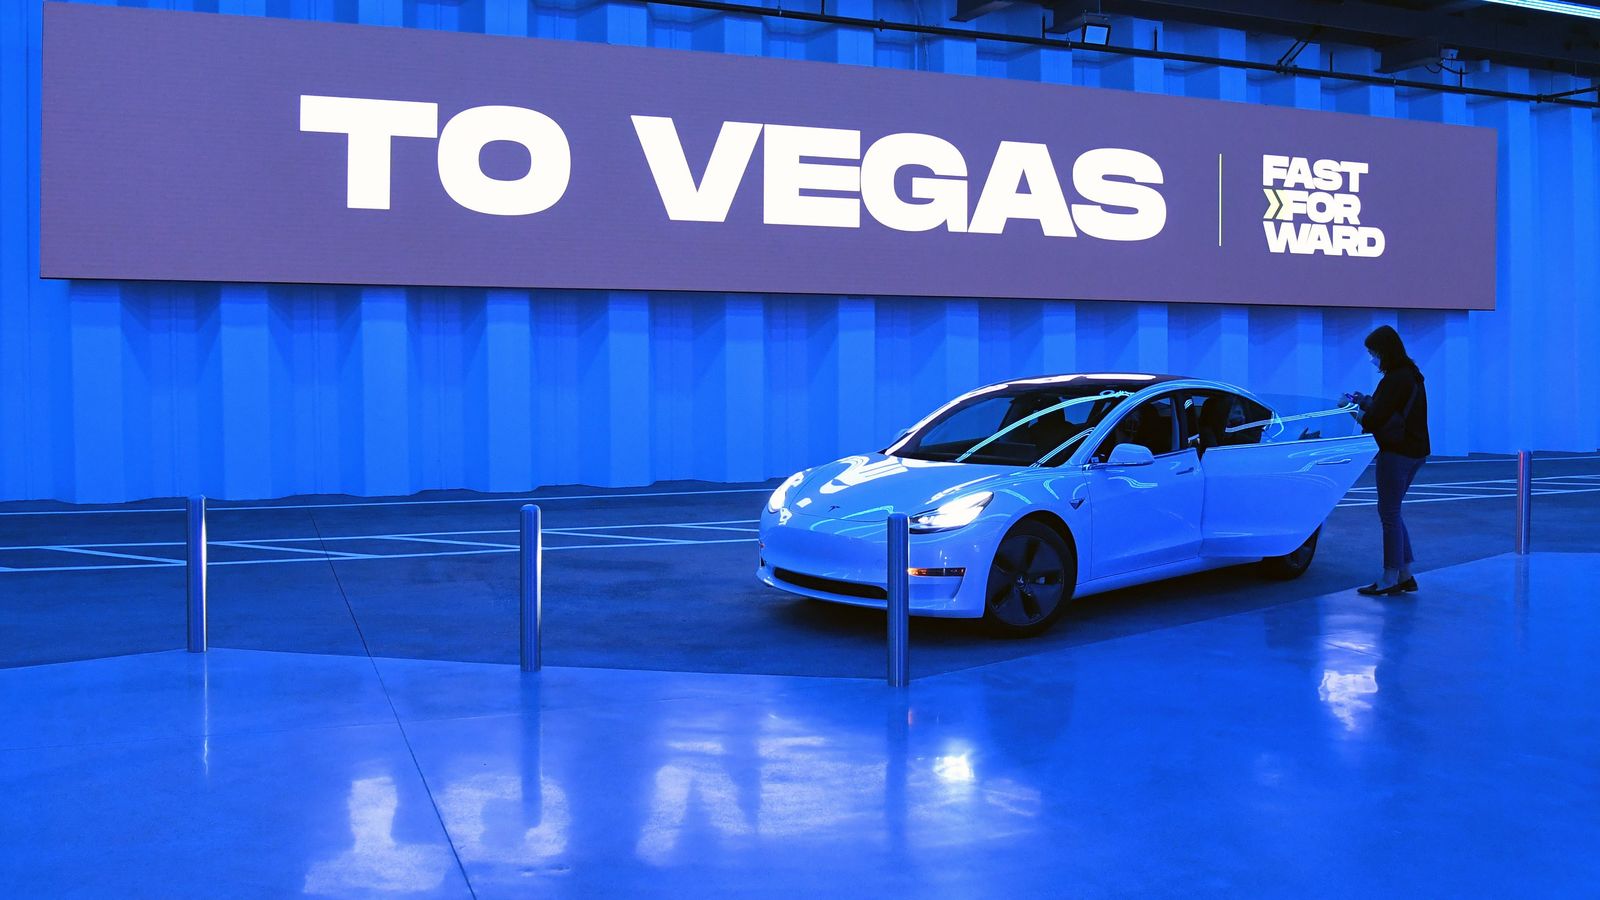 Musk's finished underground transportation loop gets a viewing in Vegas -  Friday, April 9, 2021